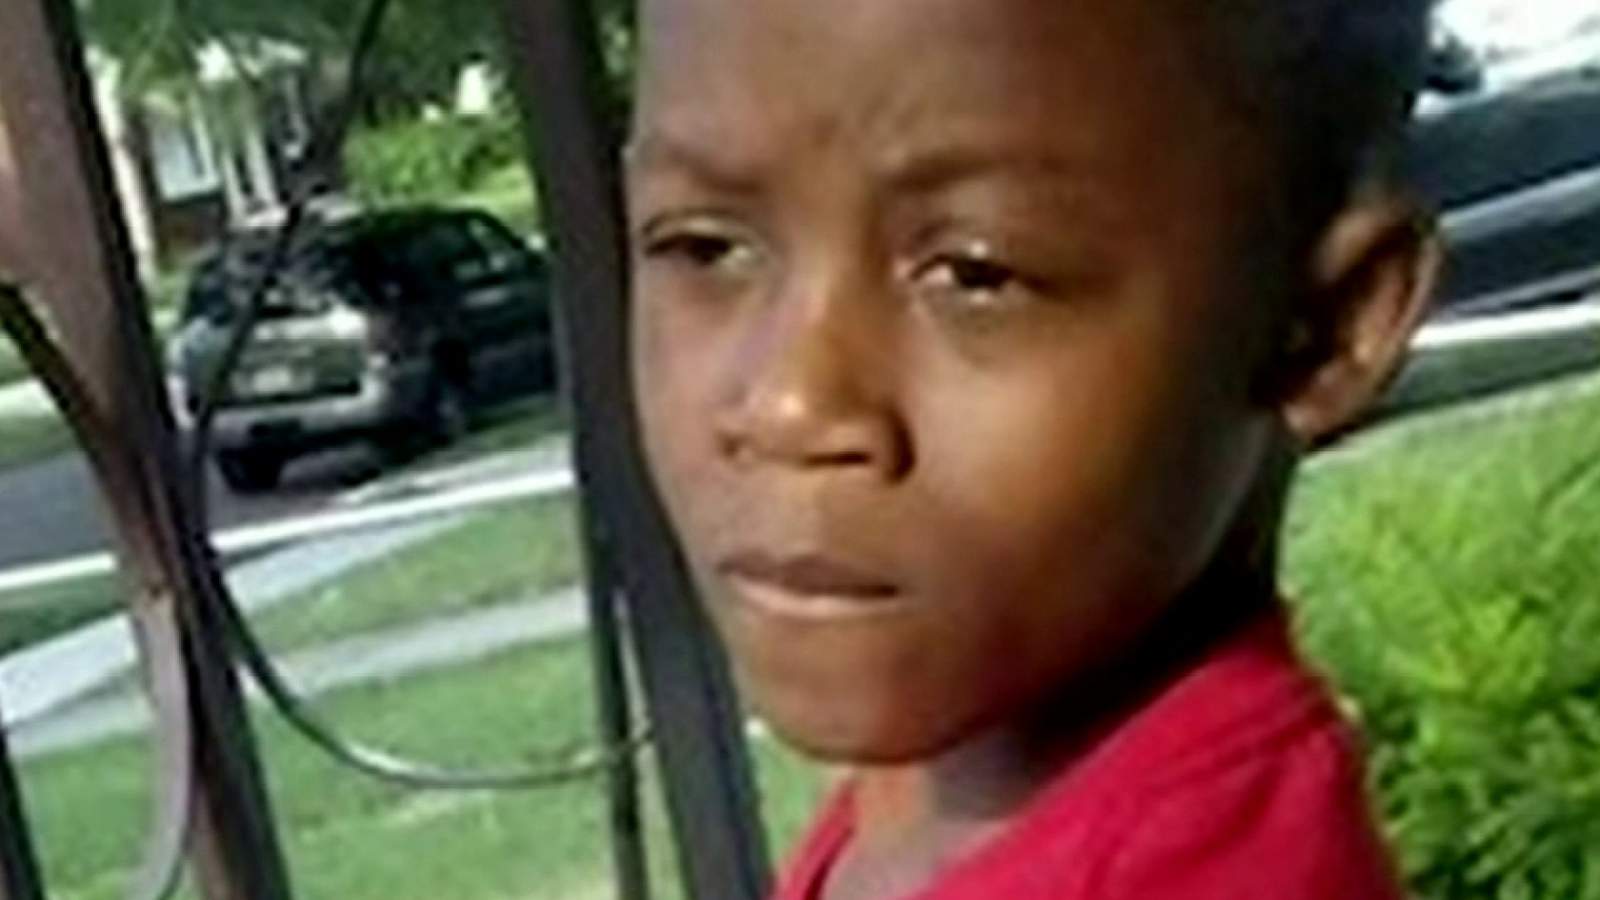 Siblings talk about 10-year-old brother killed in Warren shooting